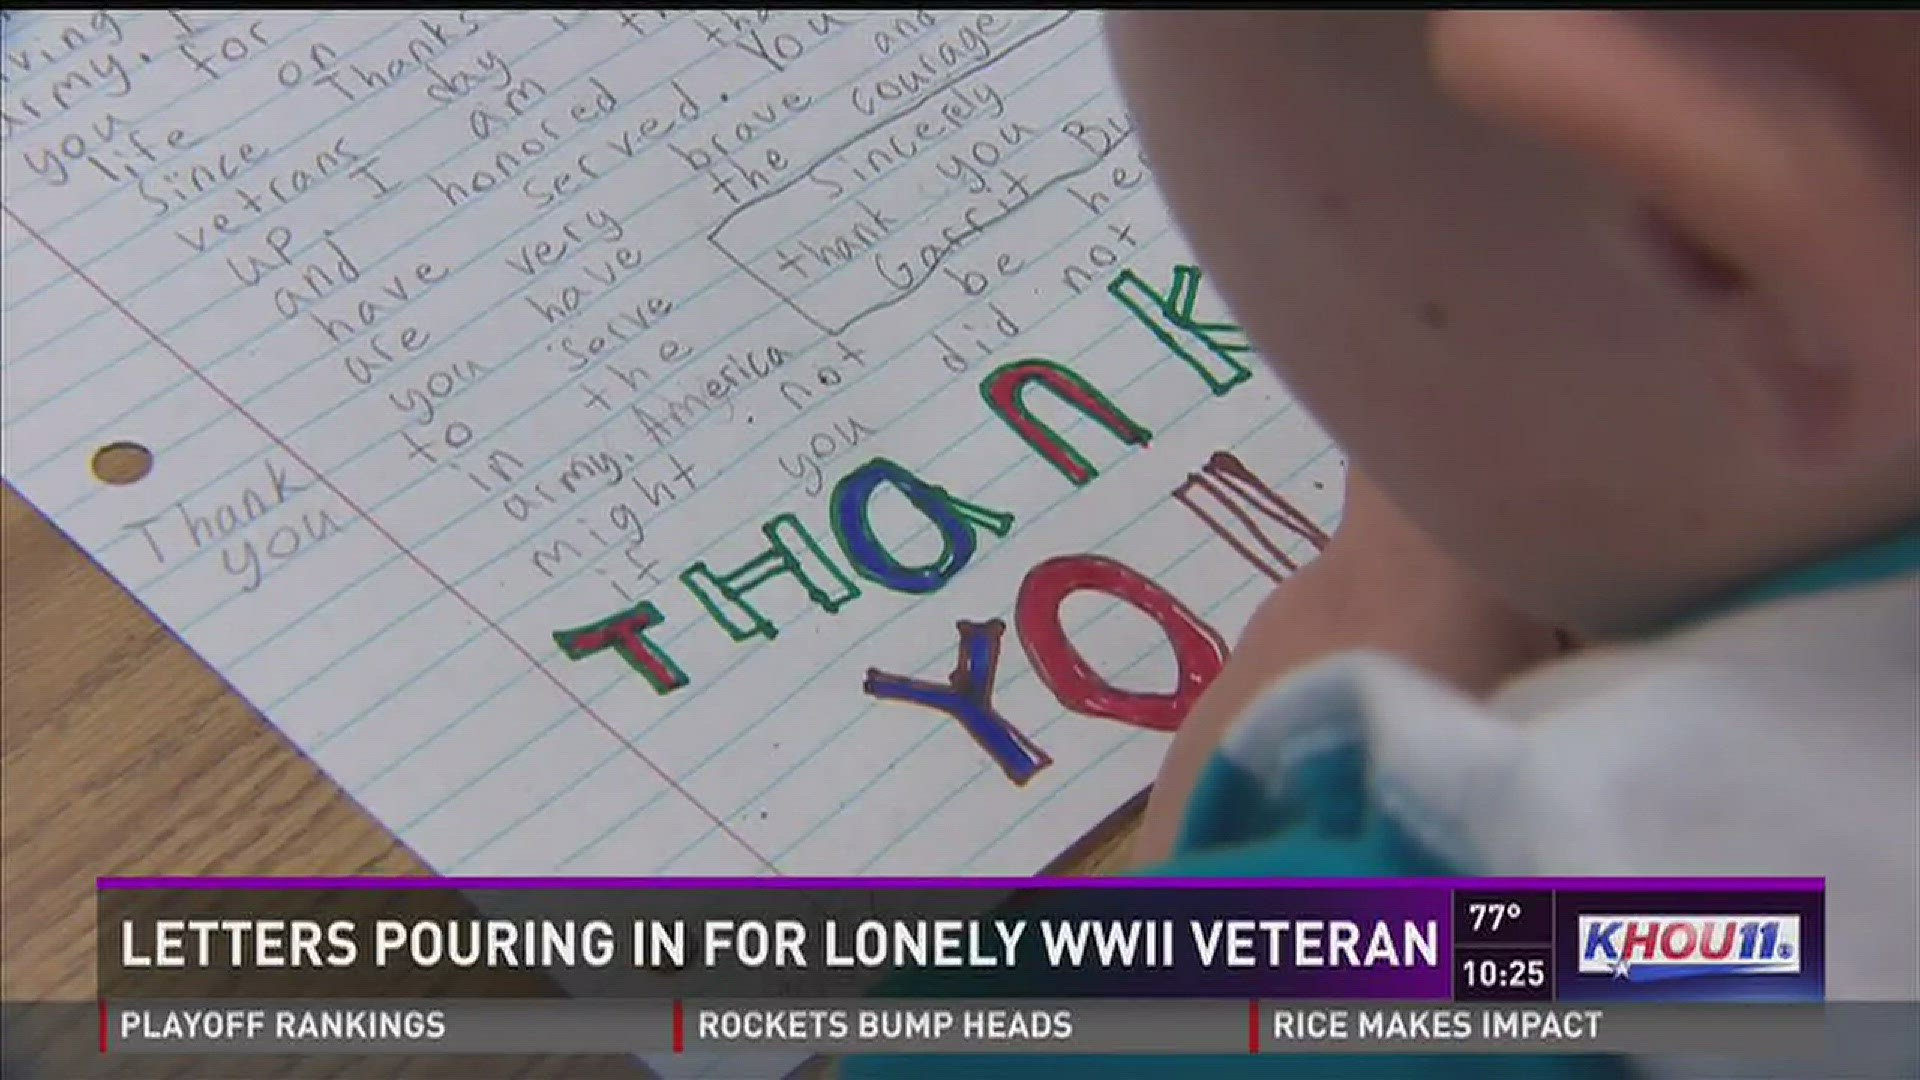 SHEPHERD, Texas - A group of fifth-graders who read troubling news about World War II veteran on Facebook decided to help.